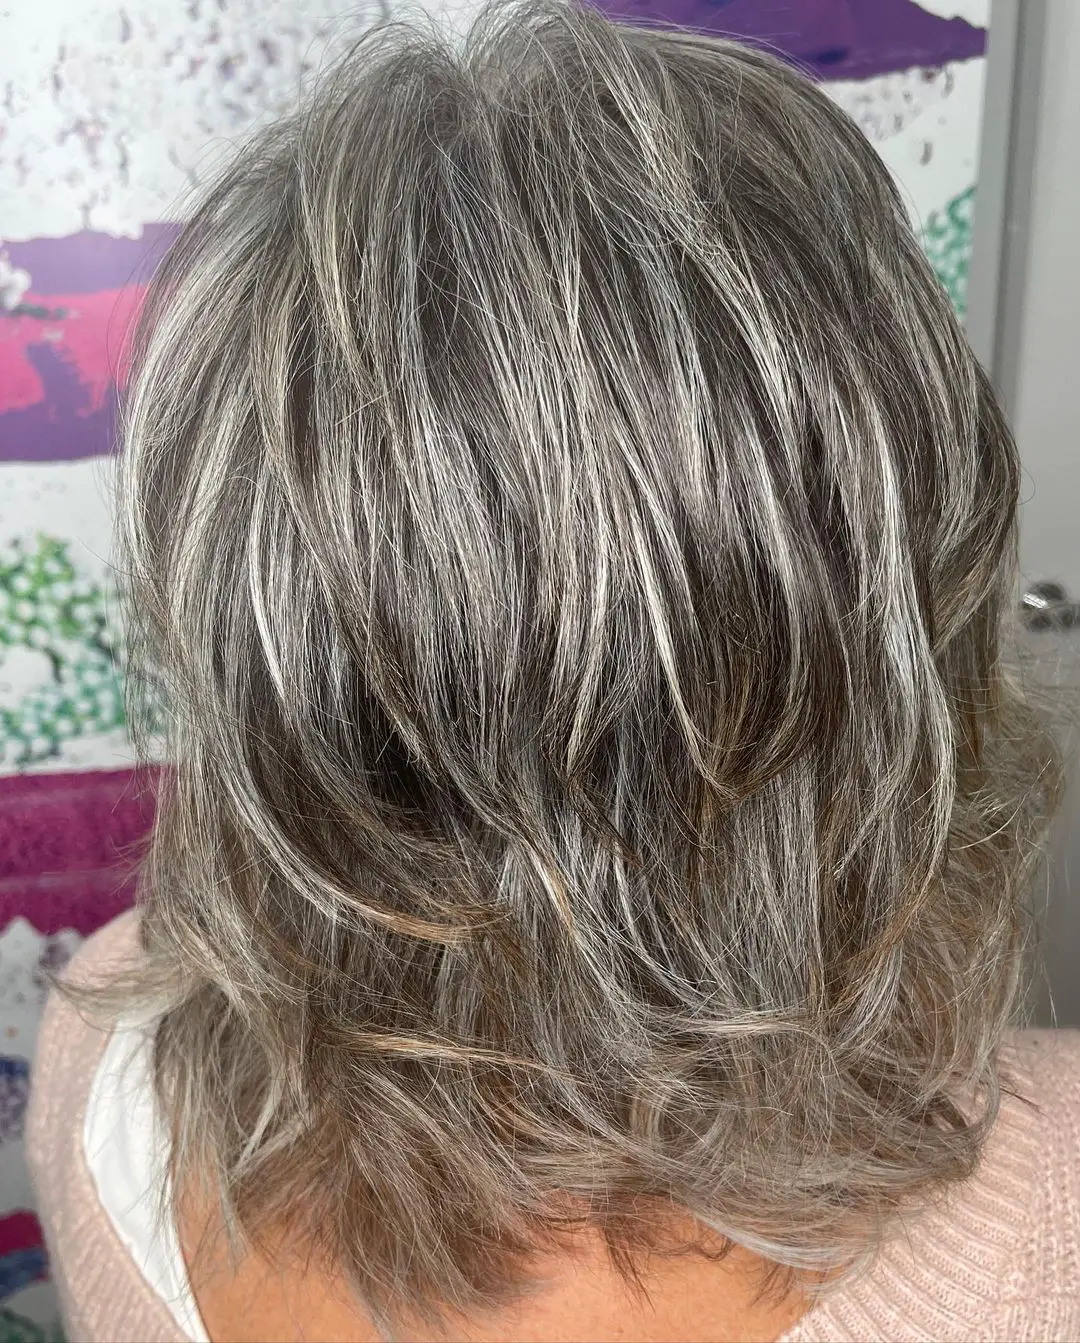 36-hairstyles-for-gorgeous-gray-hair Medium Length Hair with Short Layers